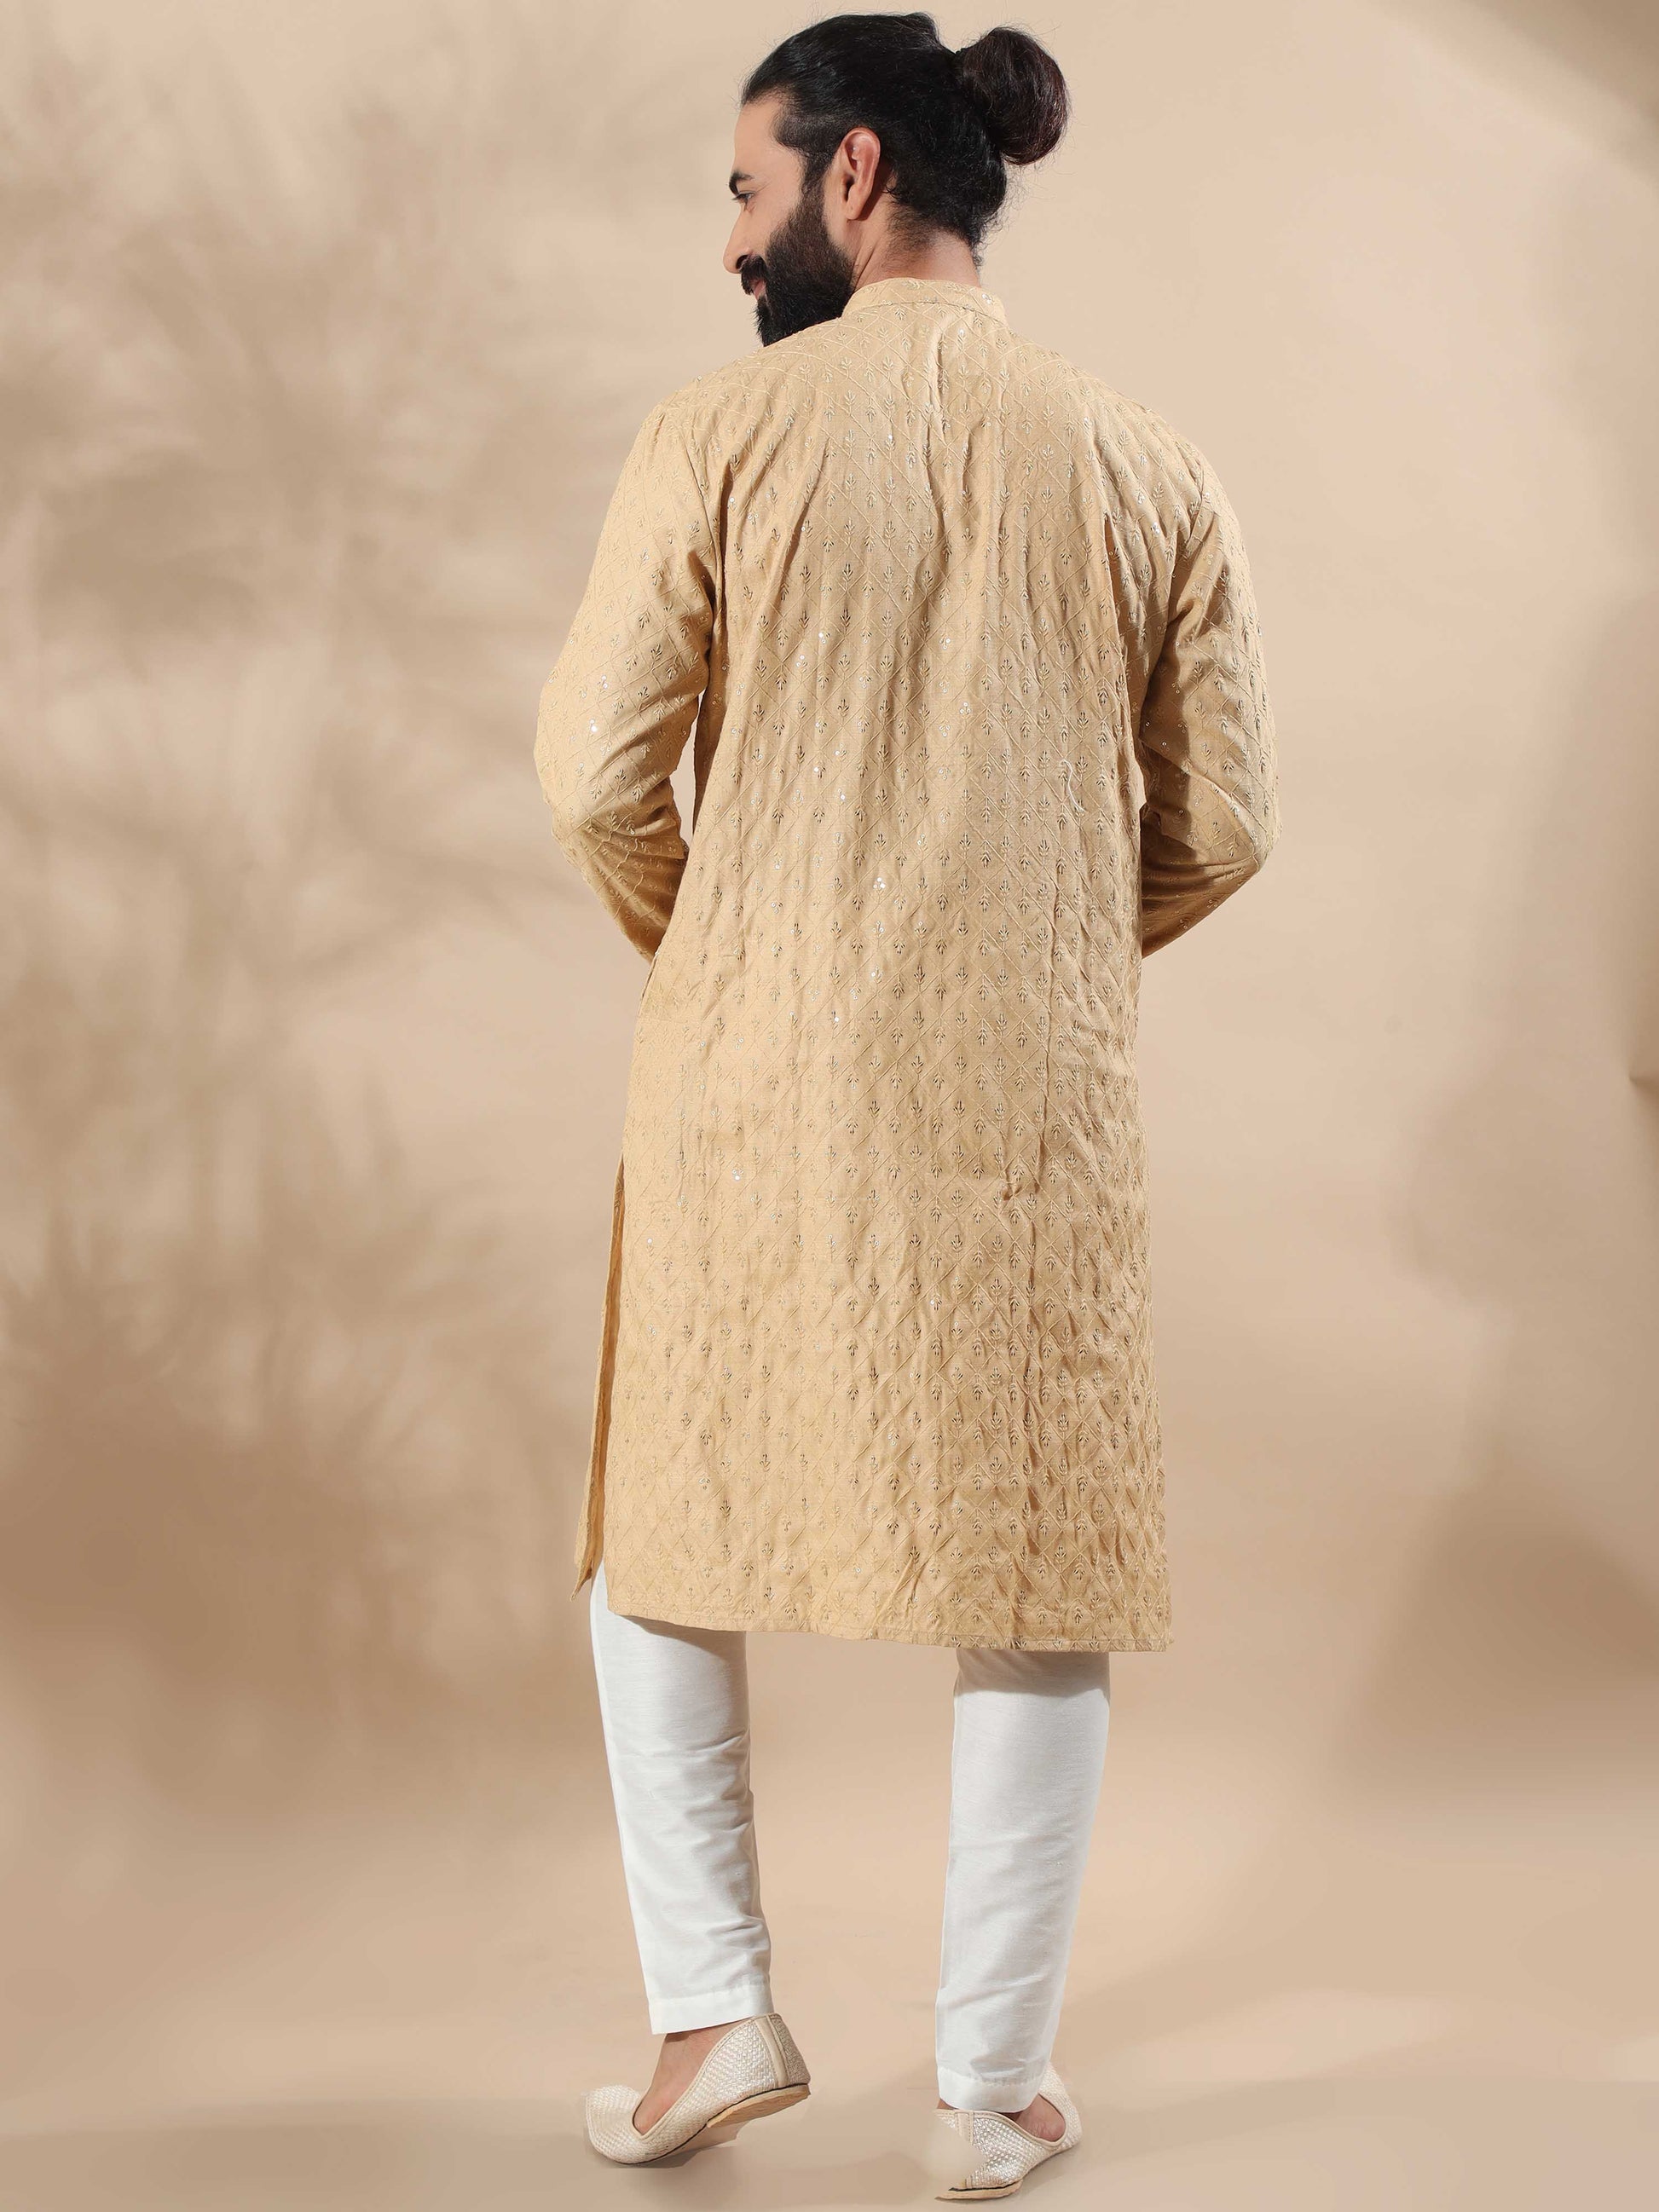 Beige Sequence gents kurta embroidery designs